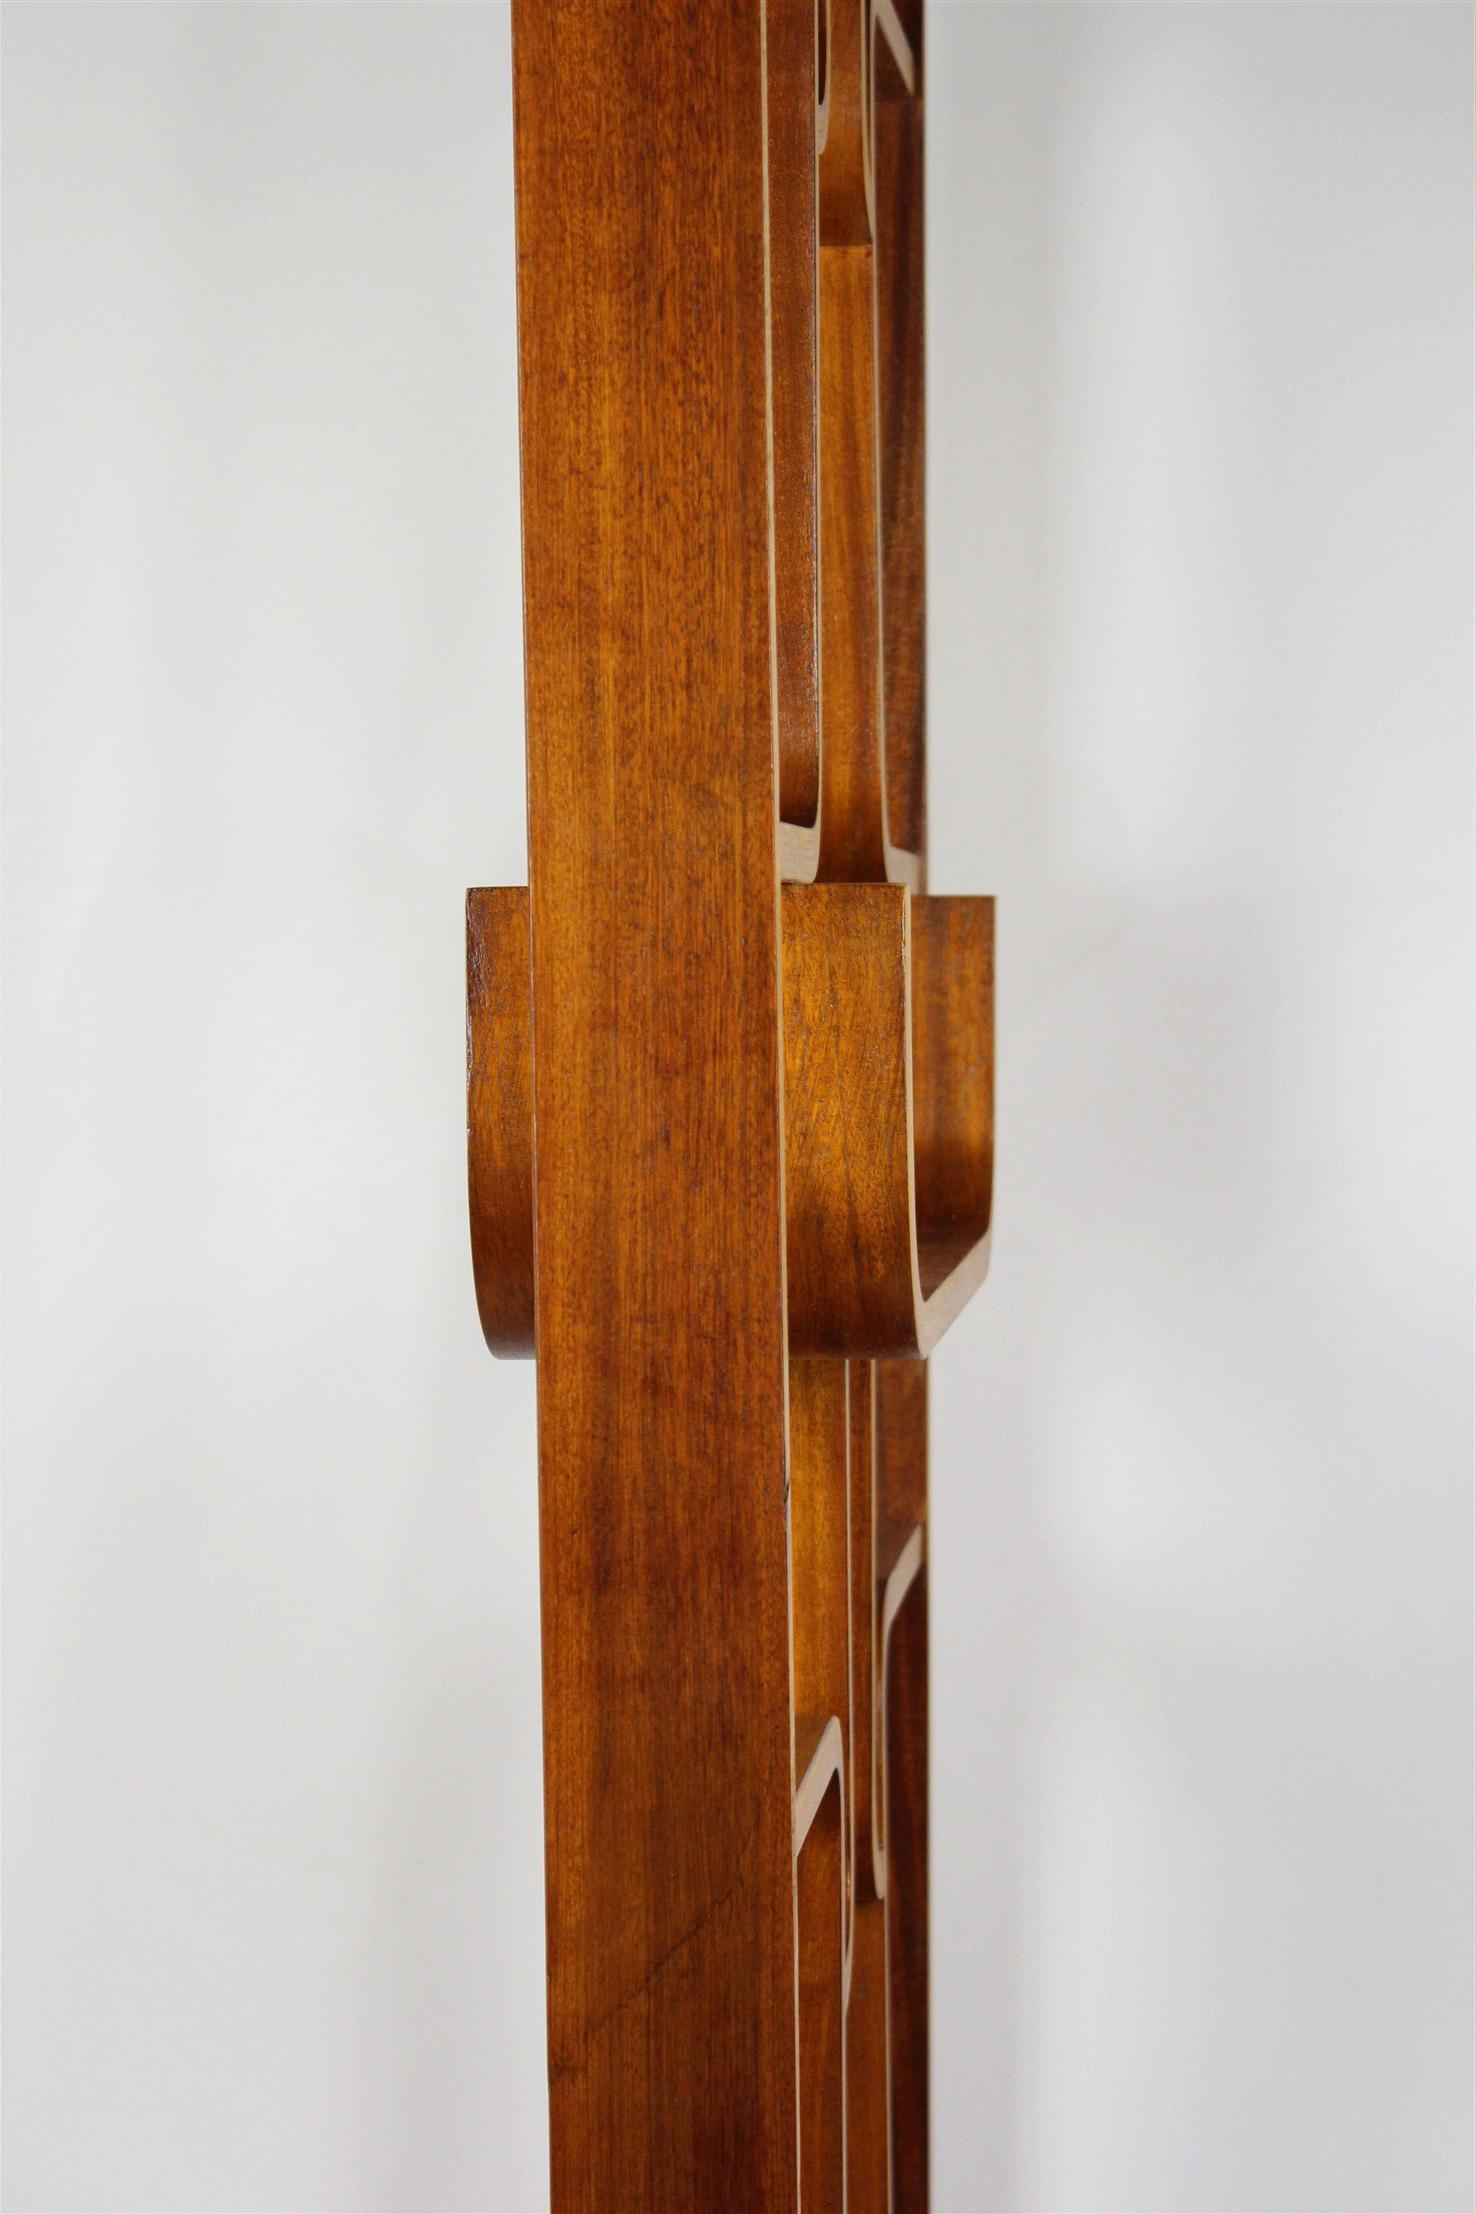 This room divider from the 1960s was designed for Drevopodnik Holešov by Ludvik Volák.
It is made from veneered bent plywood and the legs can be removed (then the height is 225cm).